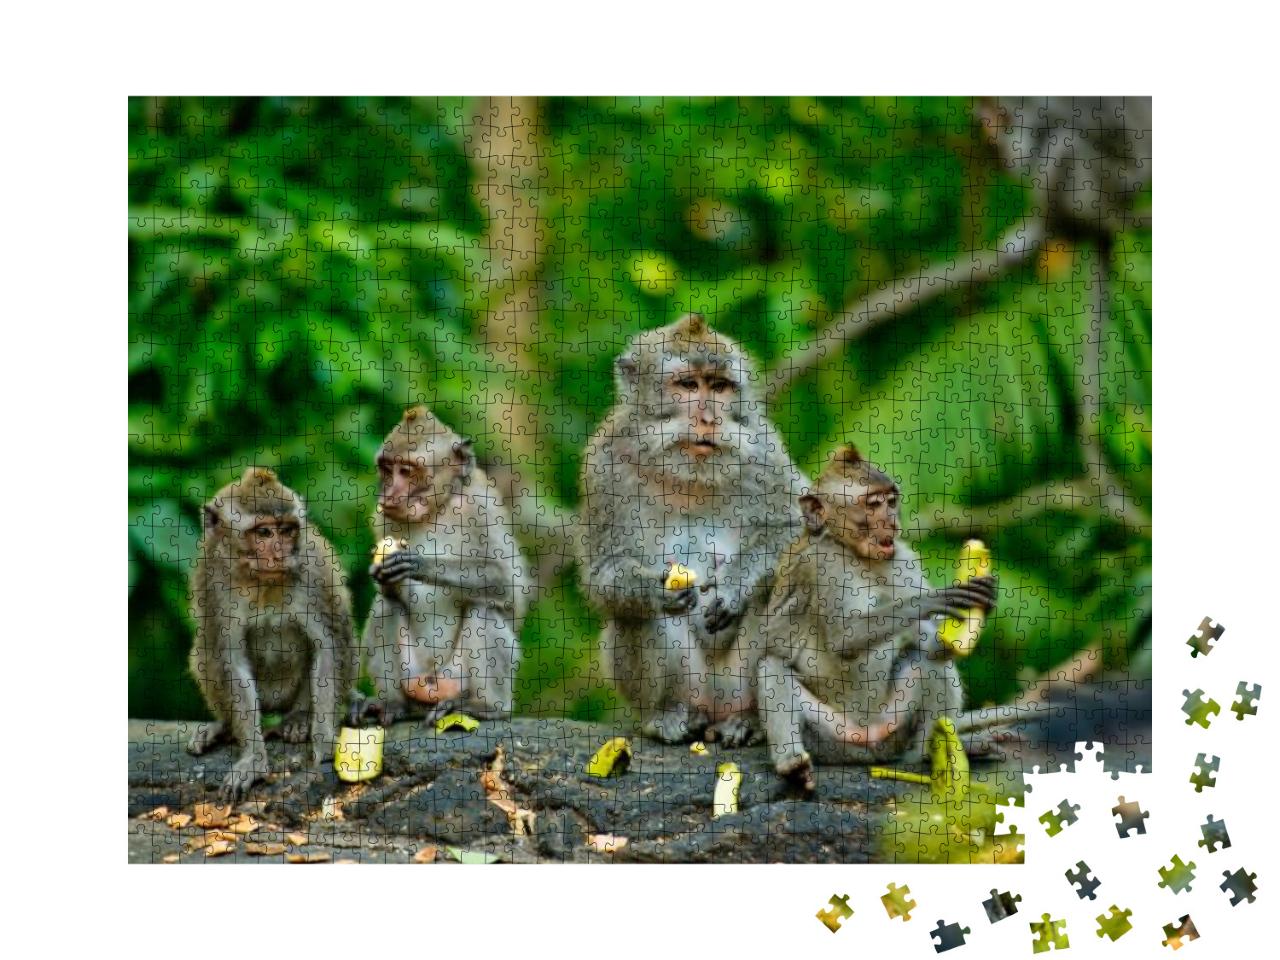 Adult Monkeys Sits & Eating Banana Fruit in the Forest. M... Jigsaw Puzzle with 1000 pieces